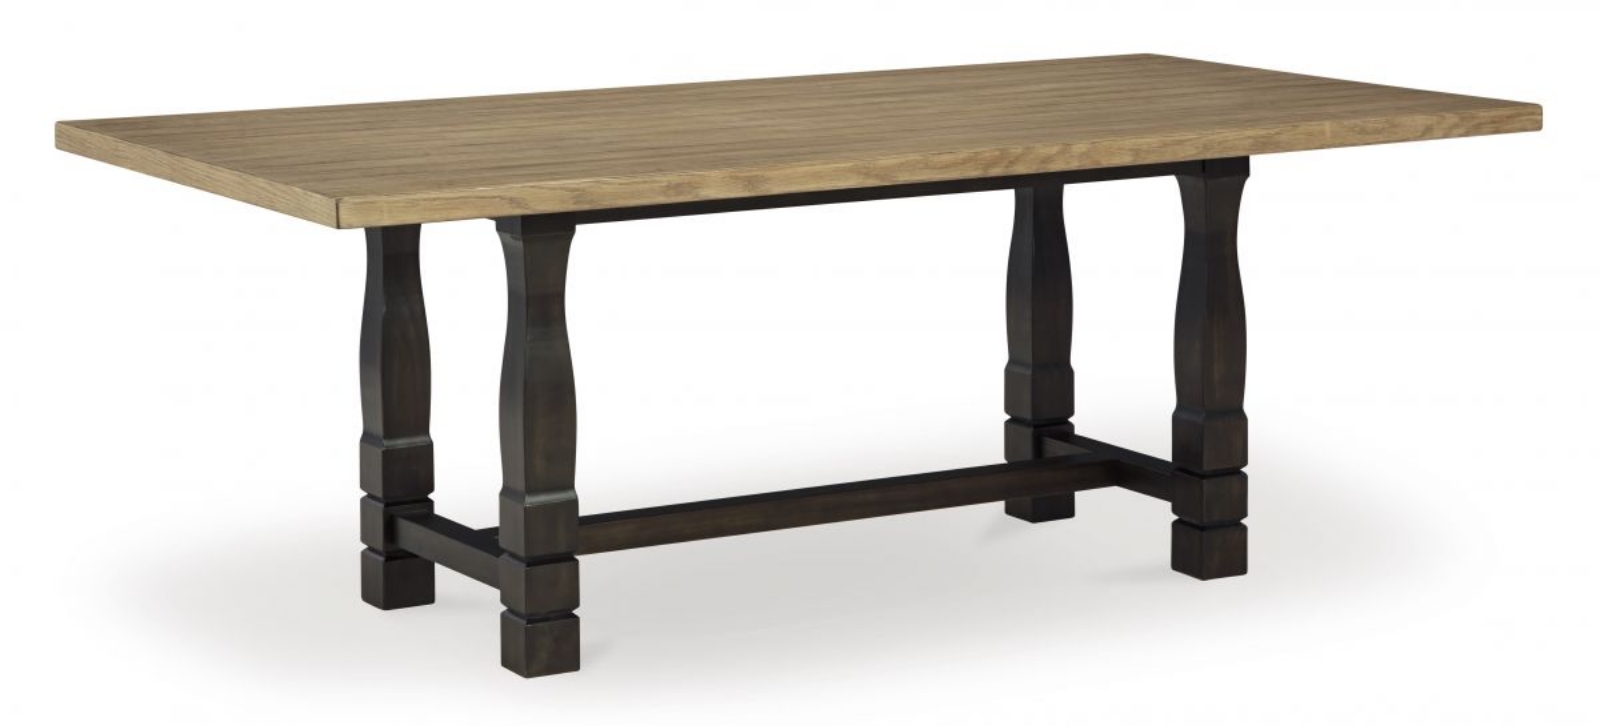 Picture of Charterton Dining Table